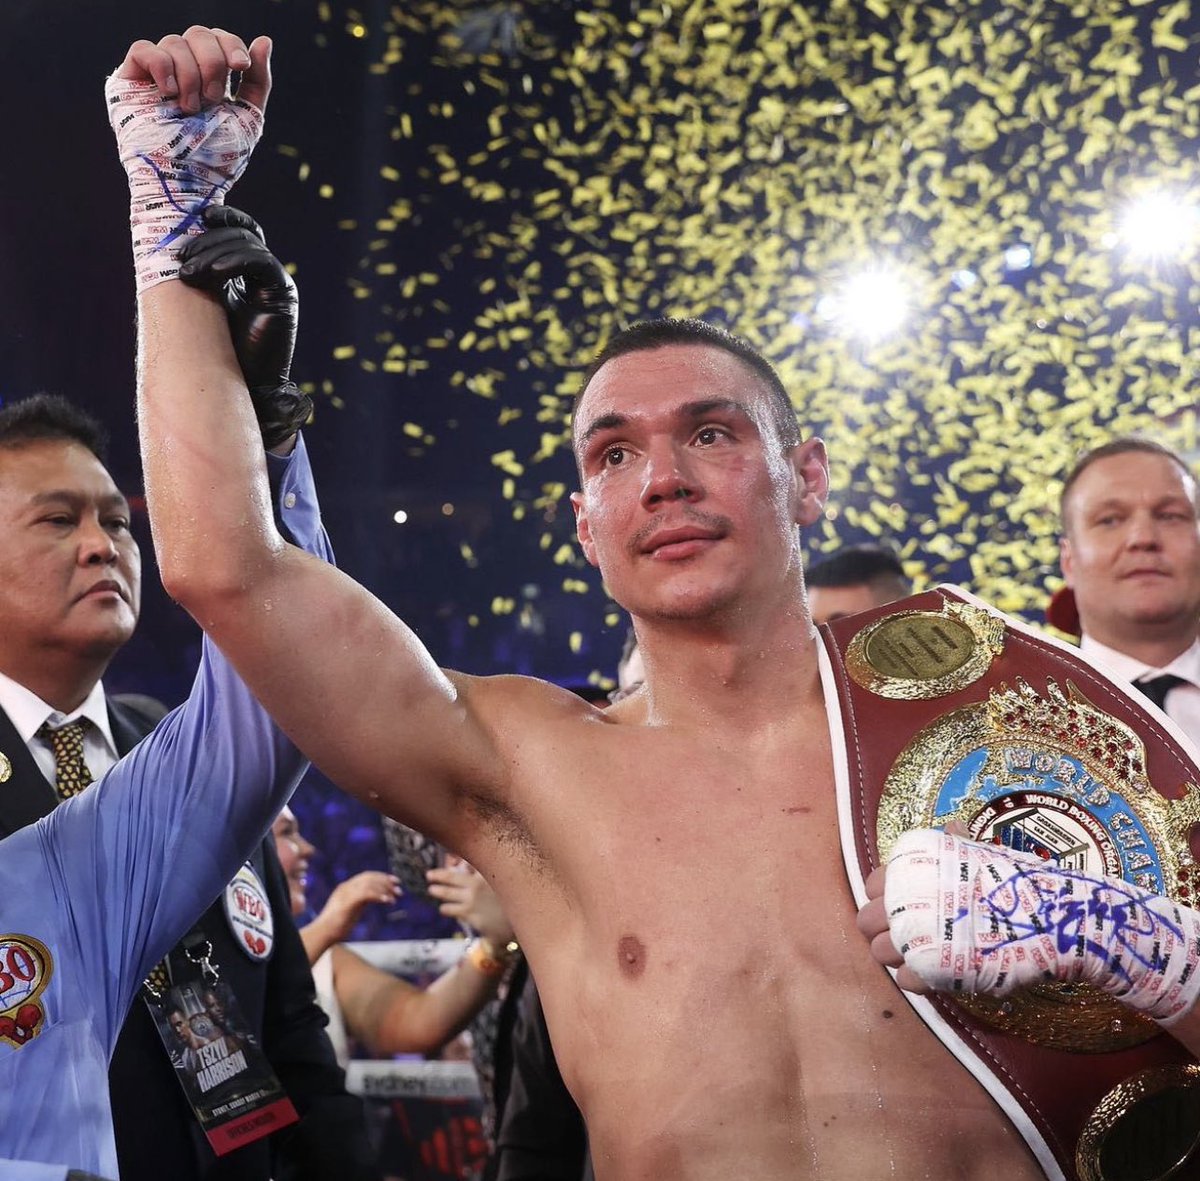 Interim WBO Junior Middleweight Champion Tim Tszyu 23-0-17 KOs demolished Carlos Ocampo in the first round. Calls out Jermell Charlo for a October Undisputed Showdown. He’s Coming to America 🇺🇸 to get those belts. #tszyuocampo #tszyu #showtimeboxing #pbcboxing #charlotszyu